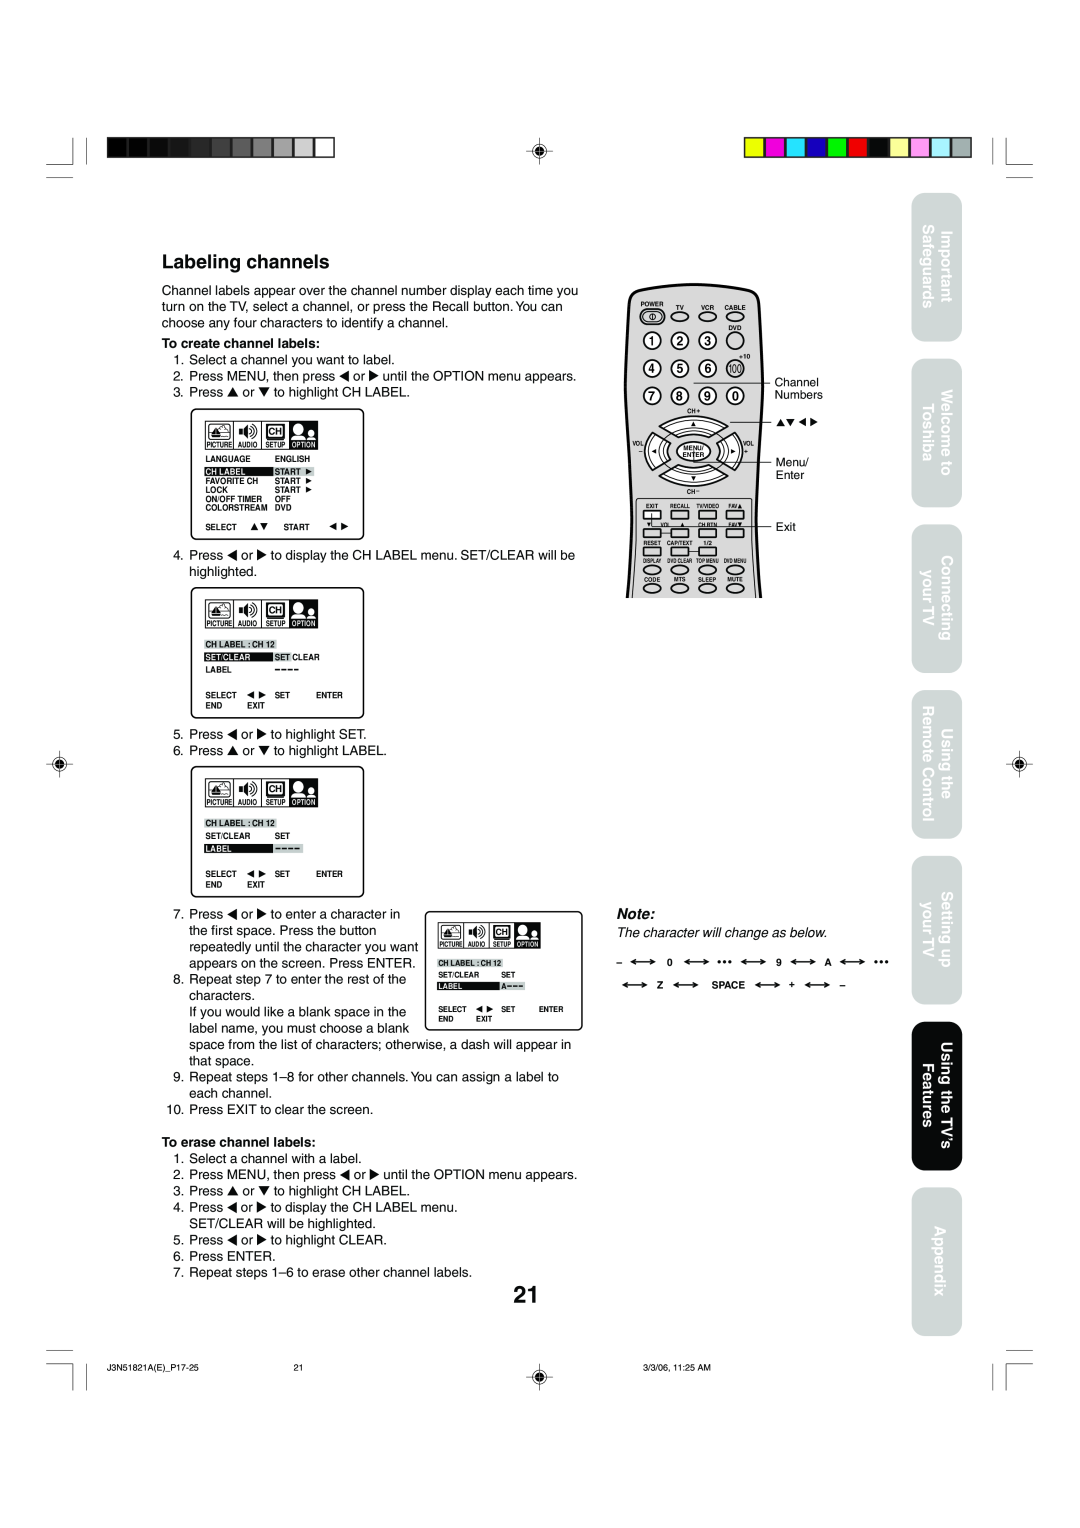 Toshiba 32A36C Labeling channels, Safeguards Toshiba your TV Remote Control your TV Features, TV’s Appendix, Using the 